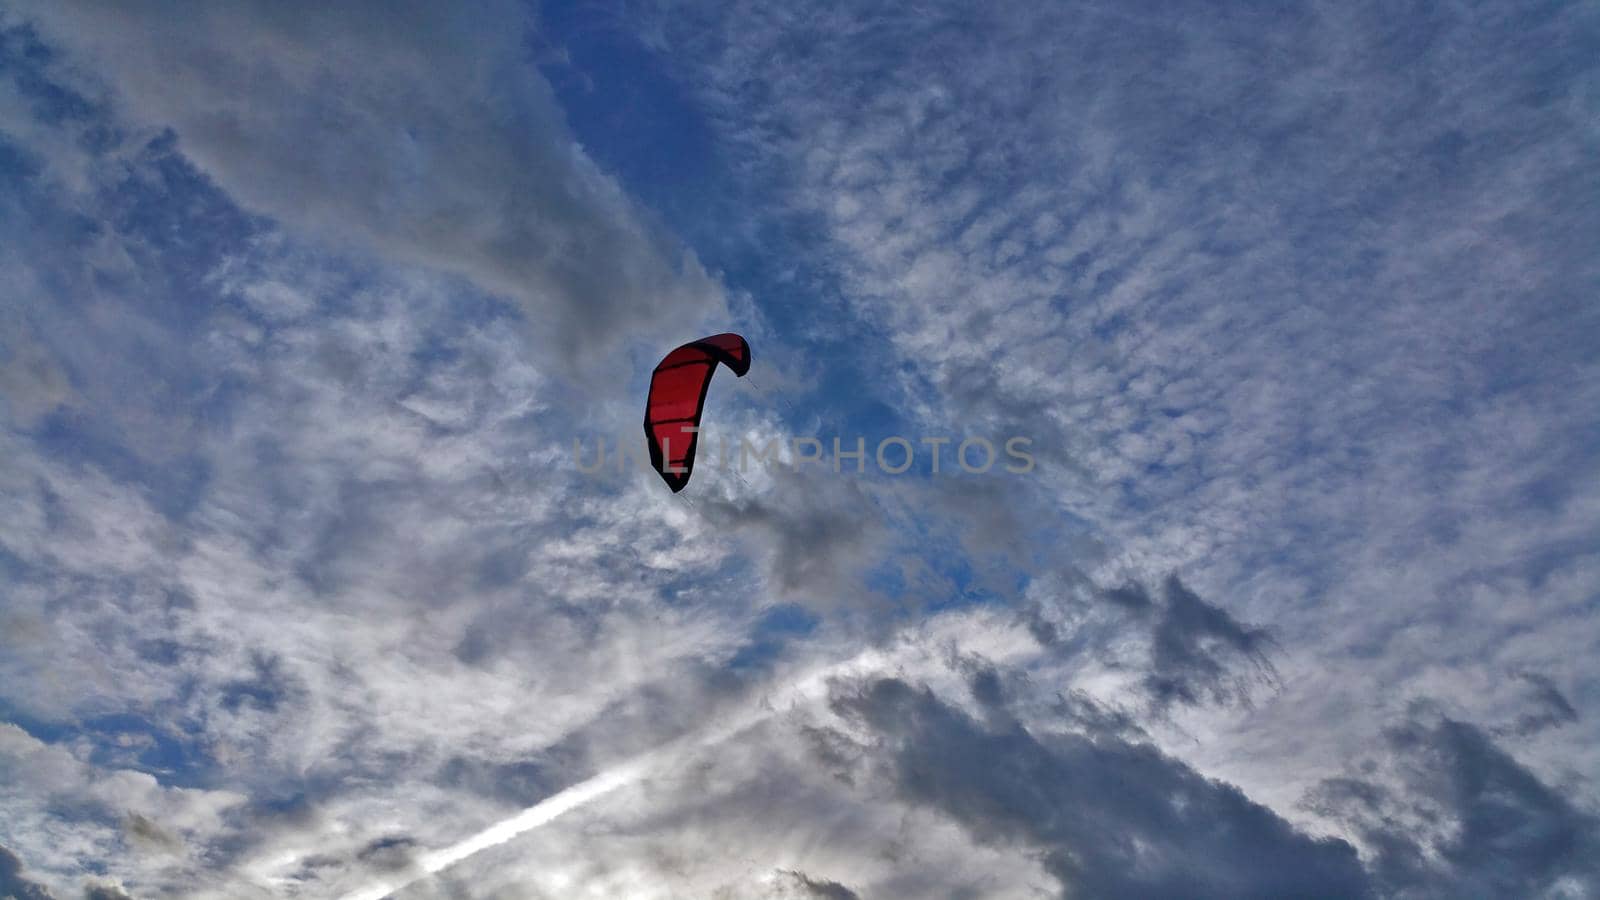 Red paraglider on the cloudy sky background.